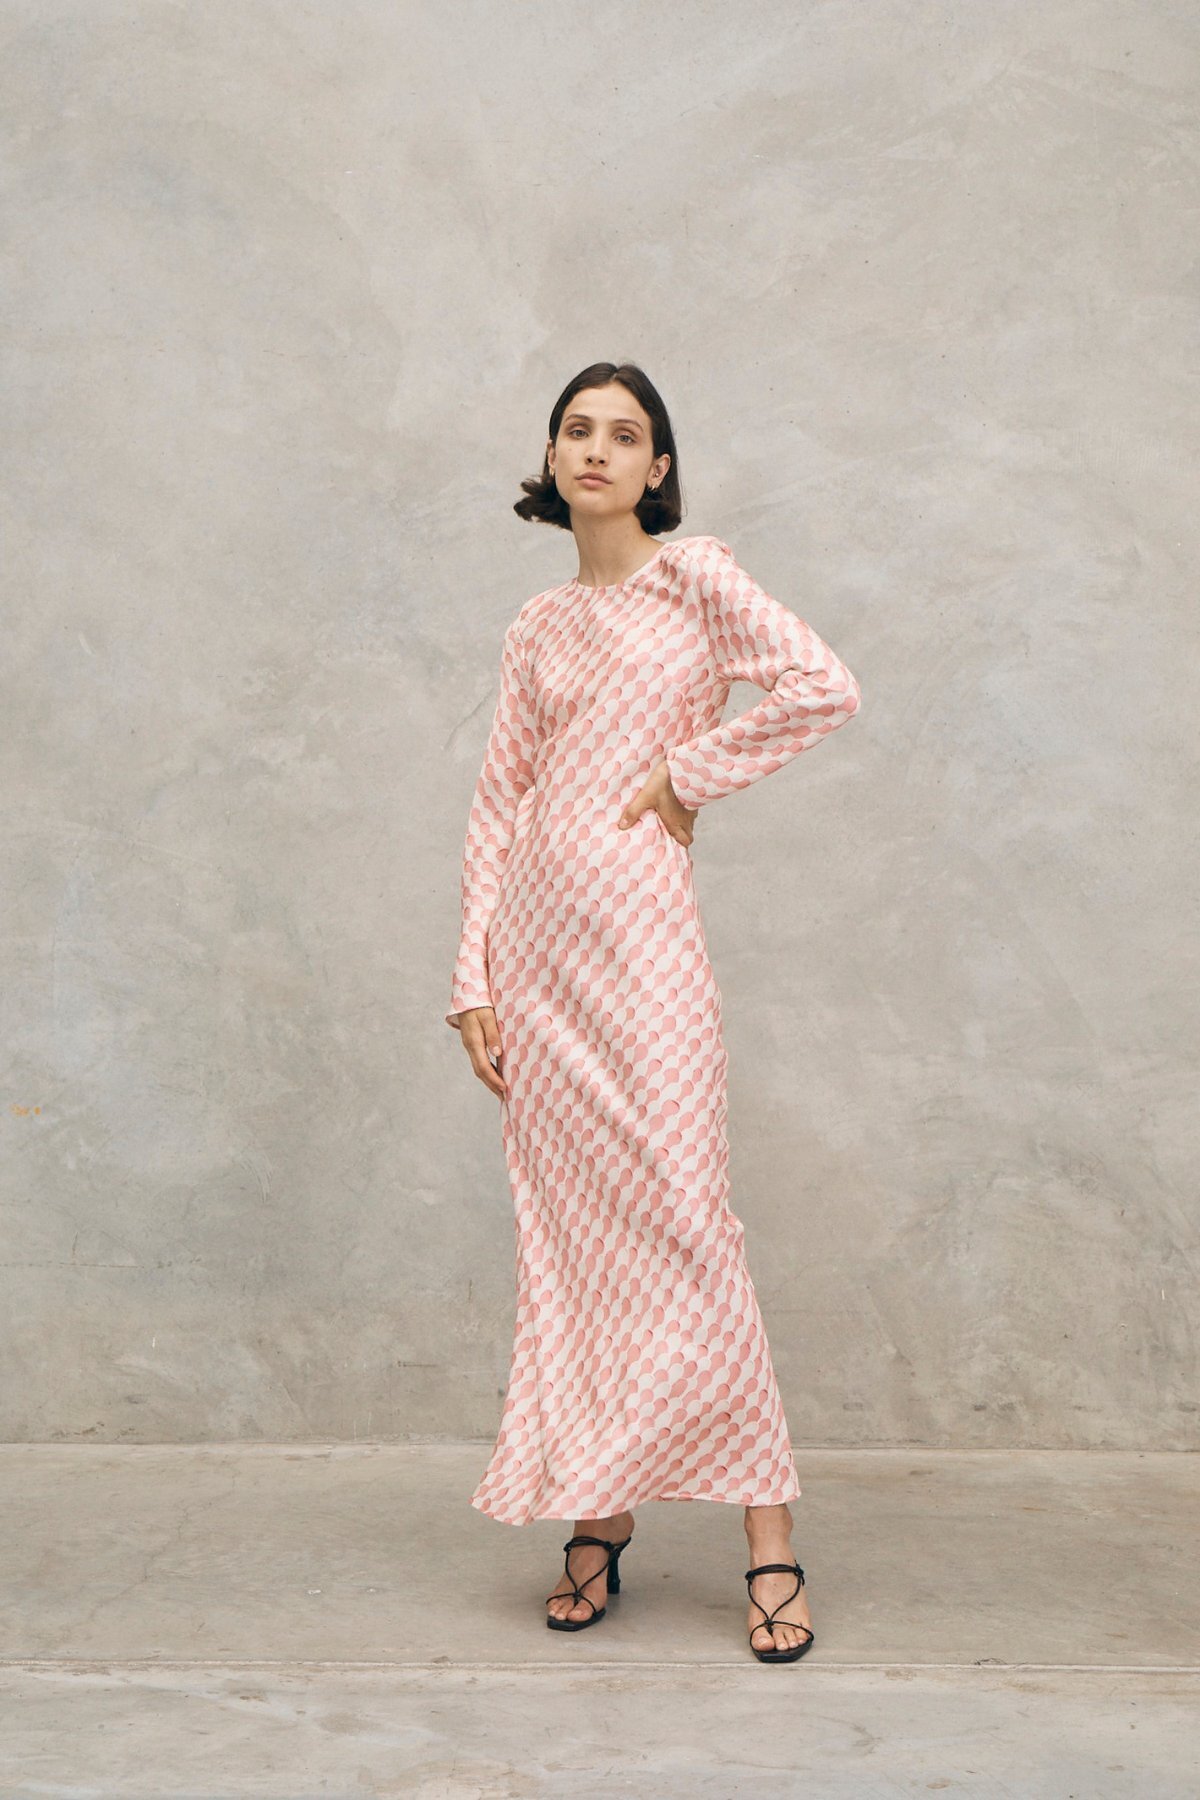 3/20Maggie MarilynPrinted silk maxi dress, available at Maggie Marilyn.